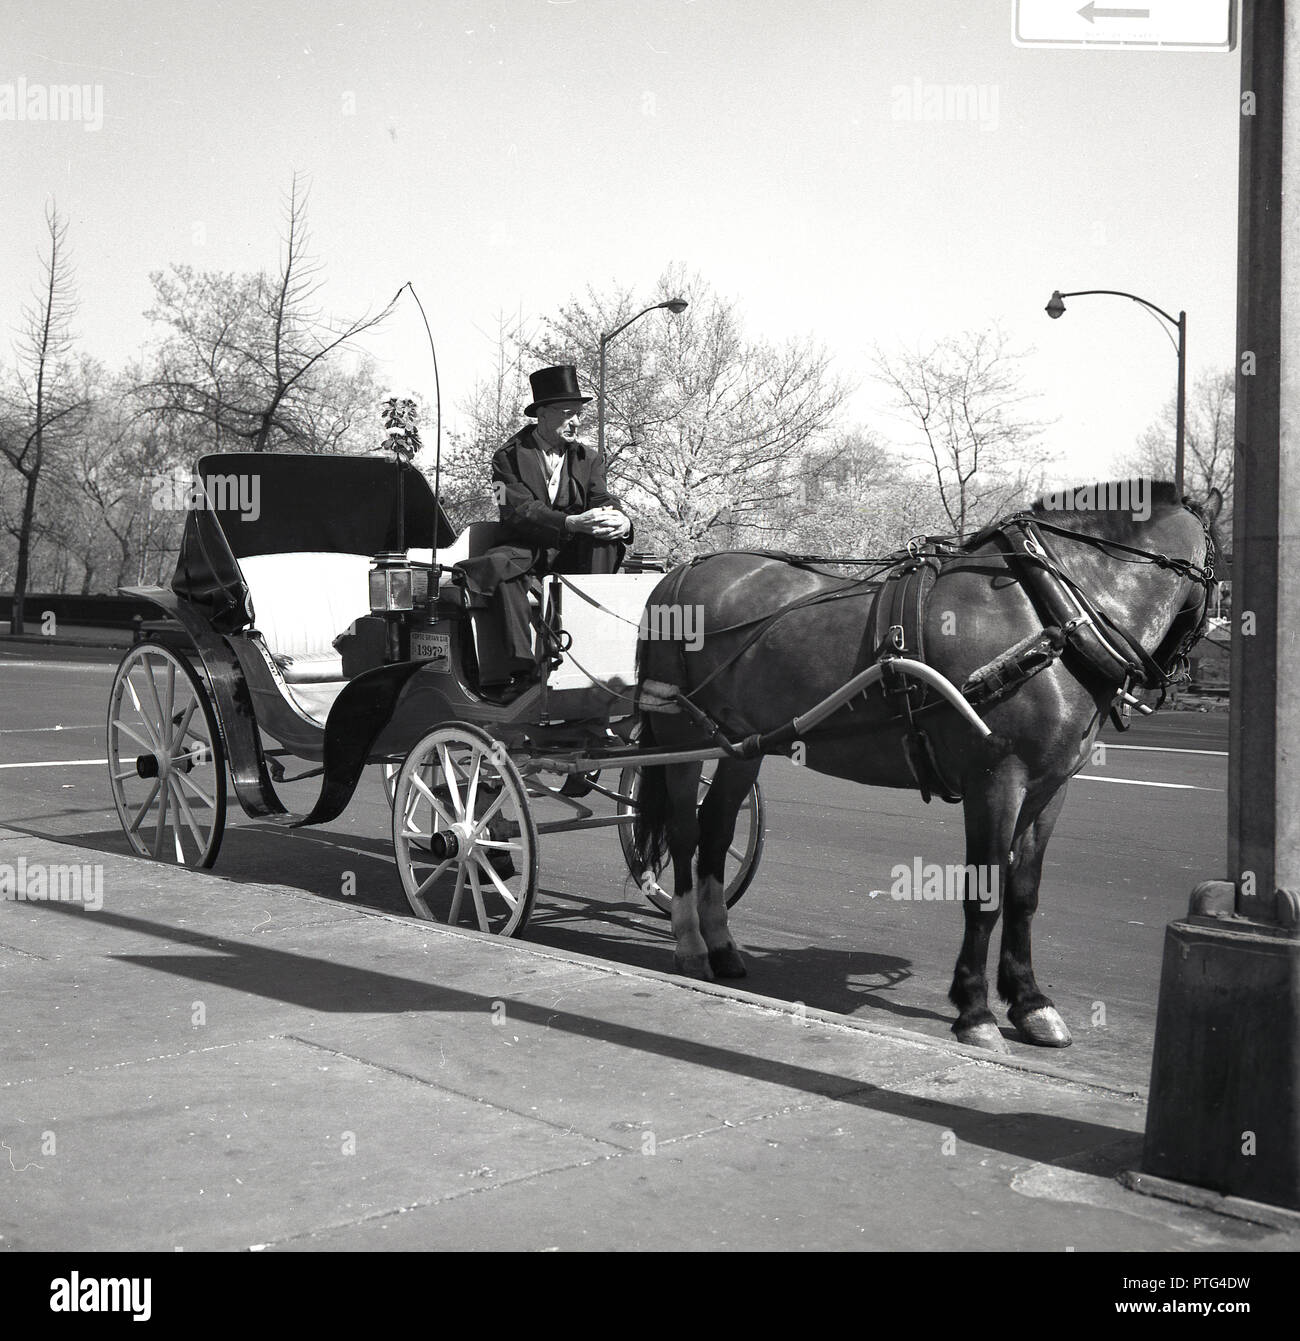 1960s, historical, open-top horse and carriage with driver in formal dress and top hat, awaiting customers by central park, New York, NYC, USA. Stock Photo